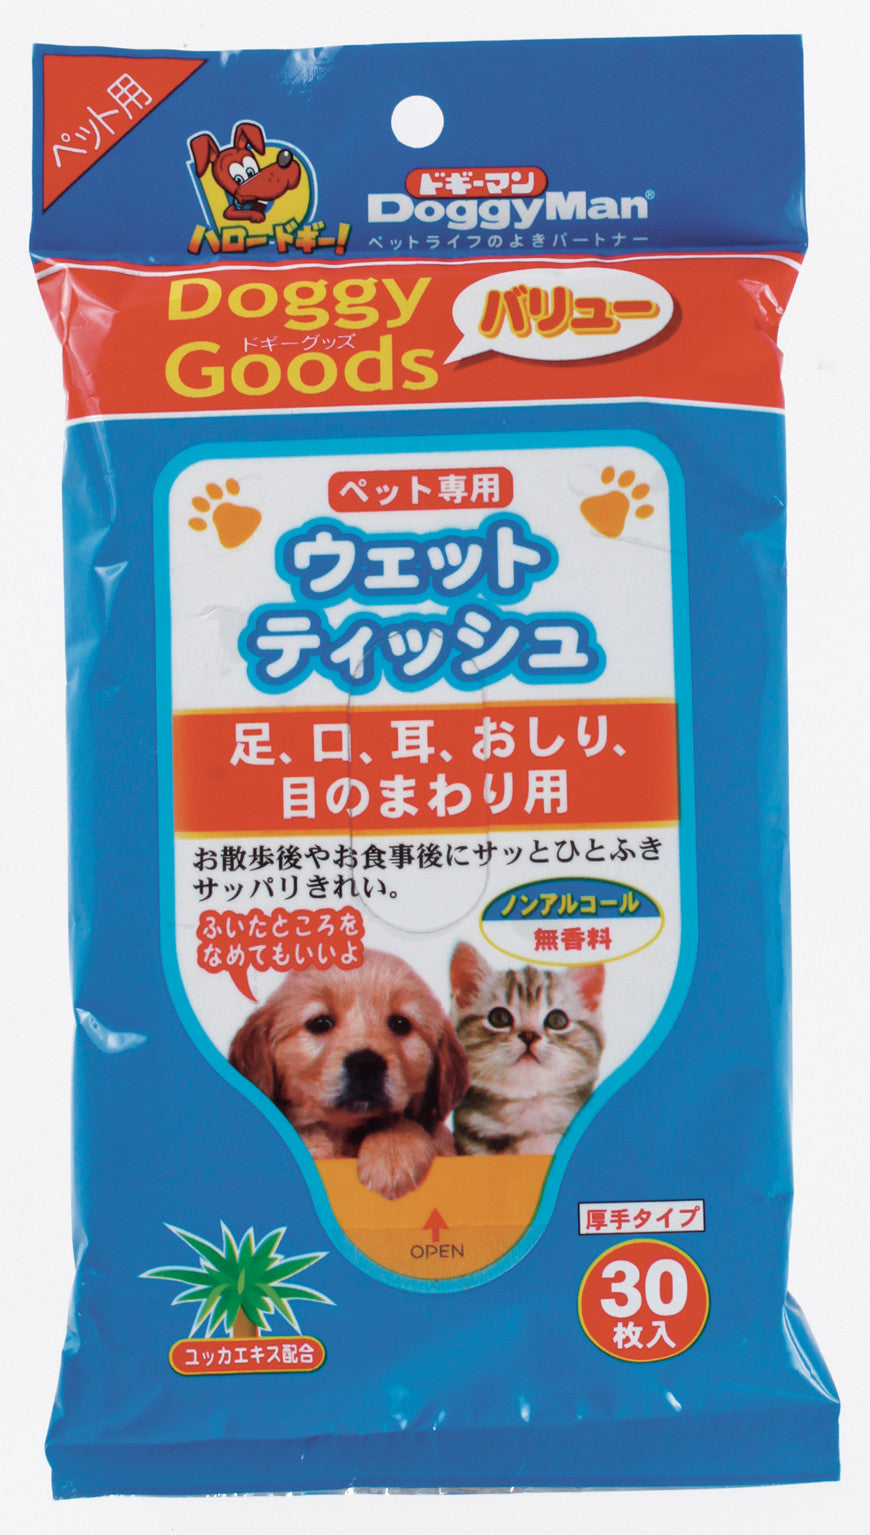 Wet Tissue for Pets